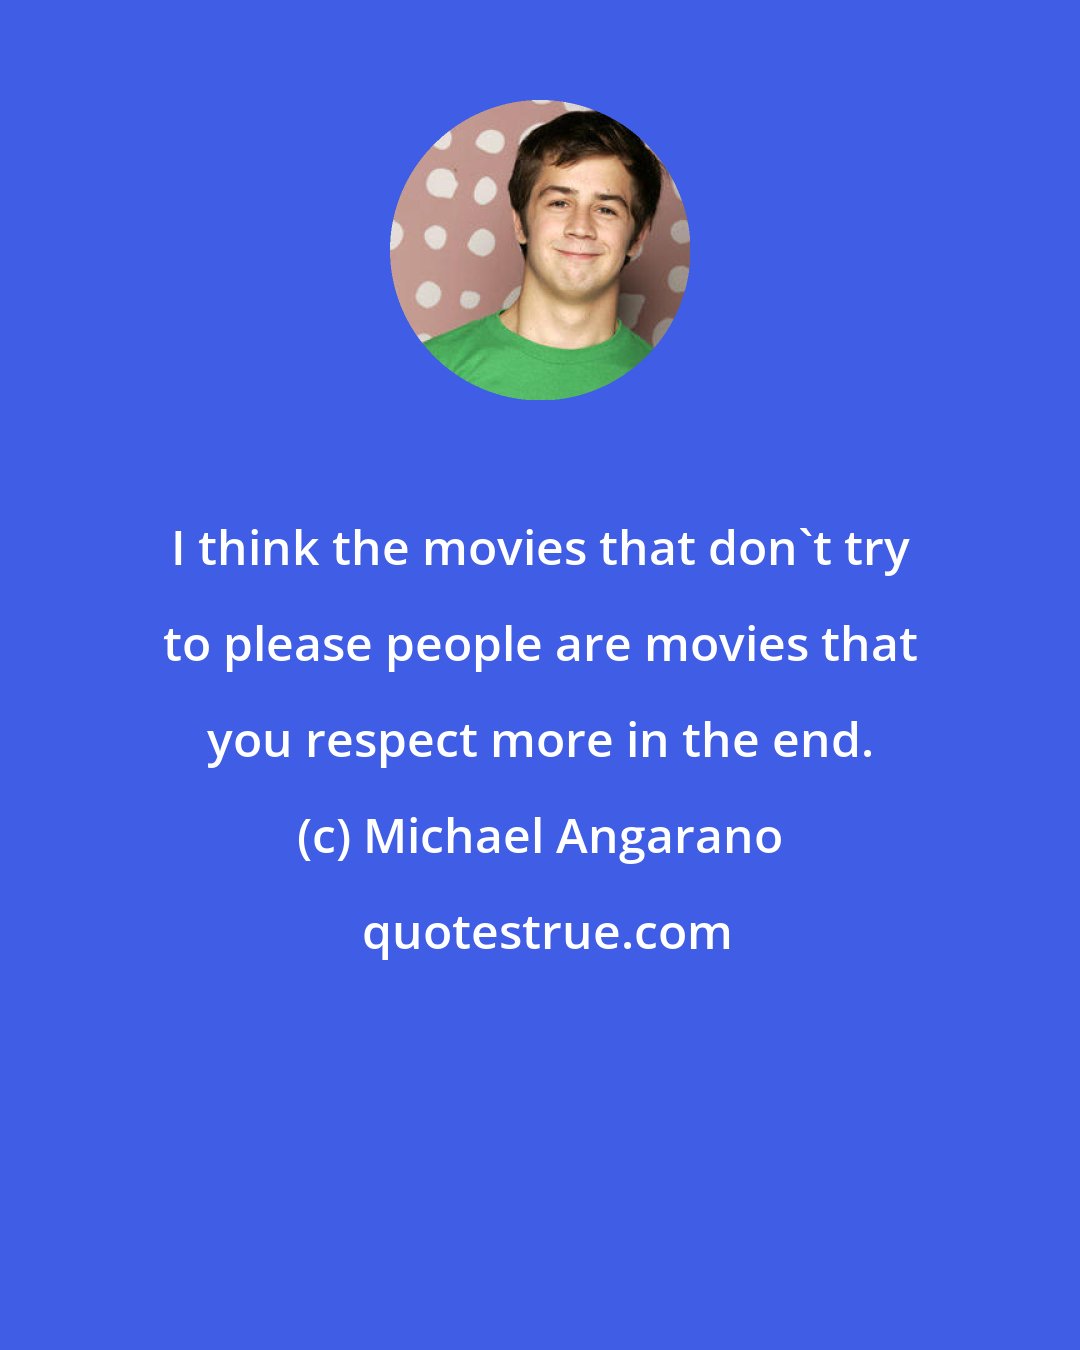 Michael Angarano: I think the movies that don't try to please people are movies that you respect more in the end.